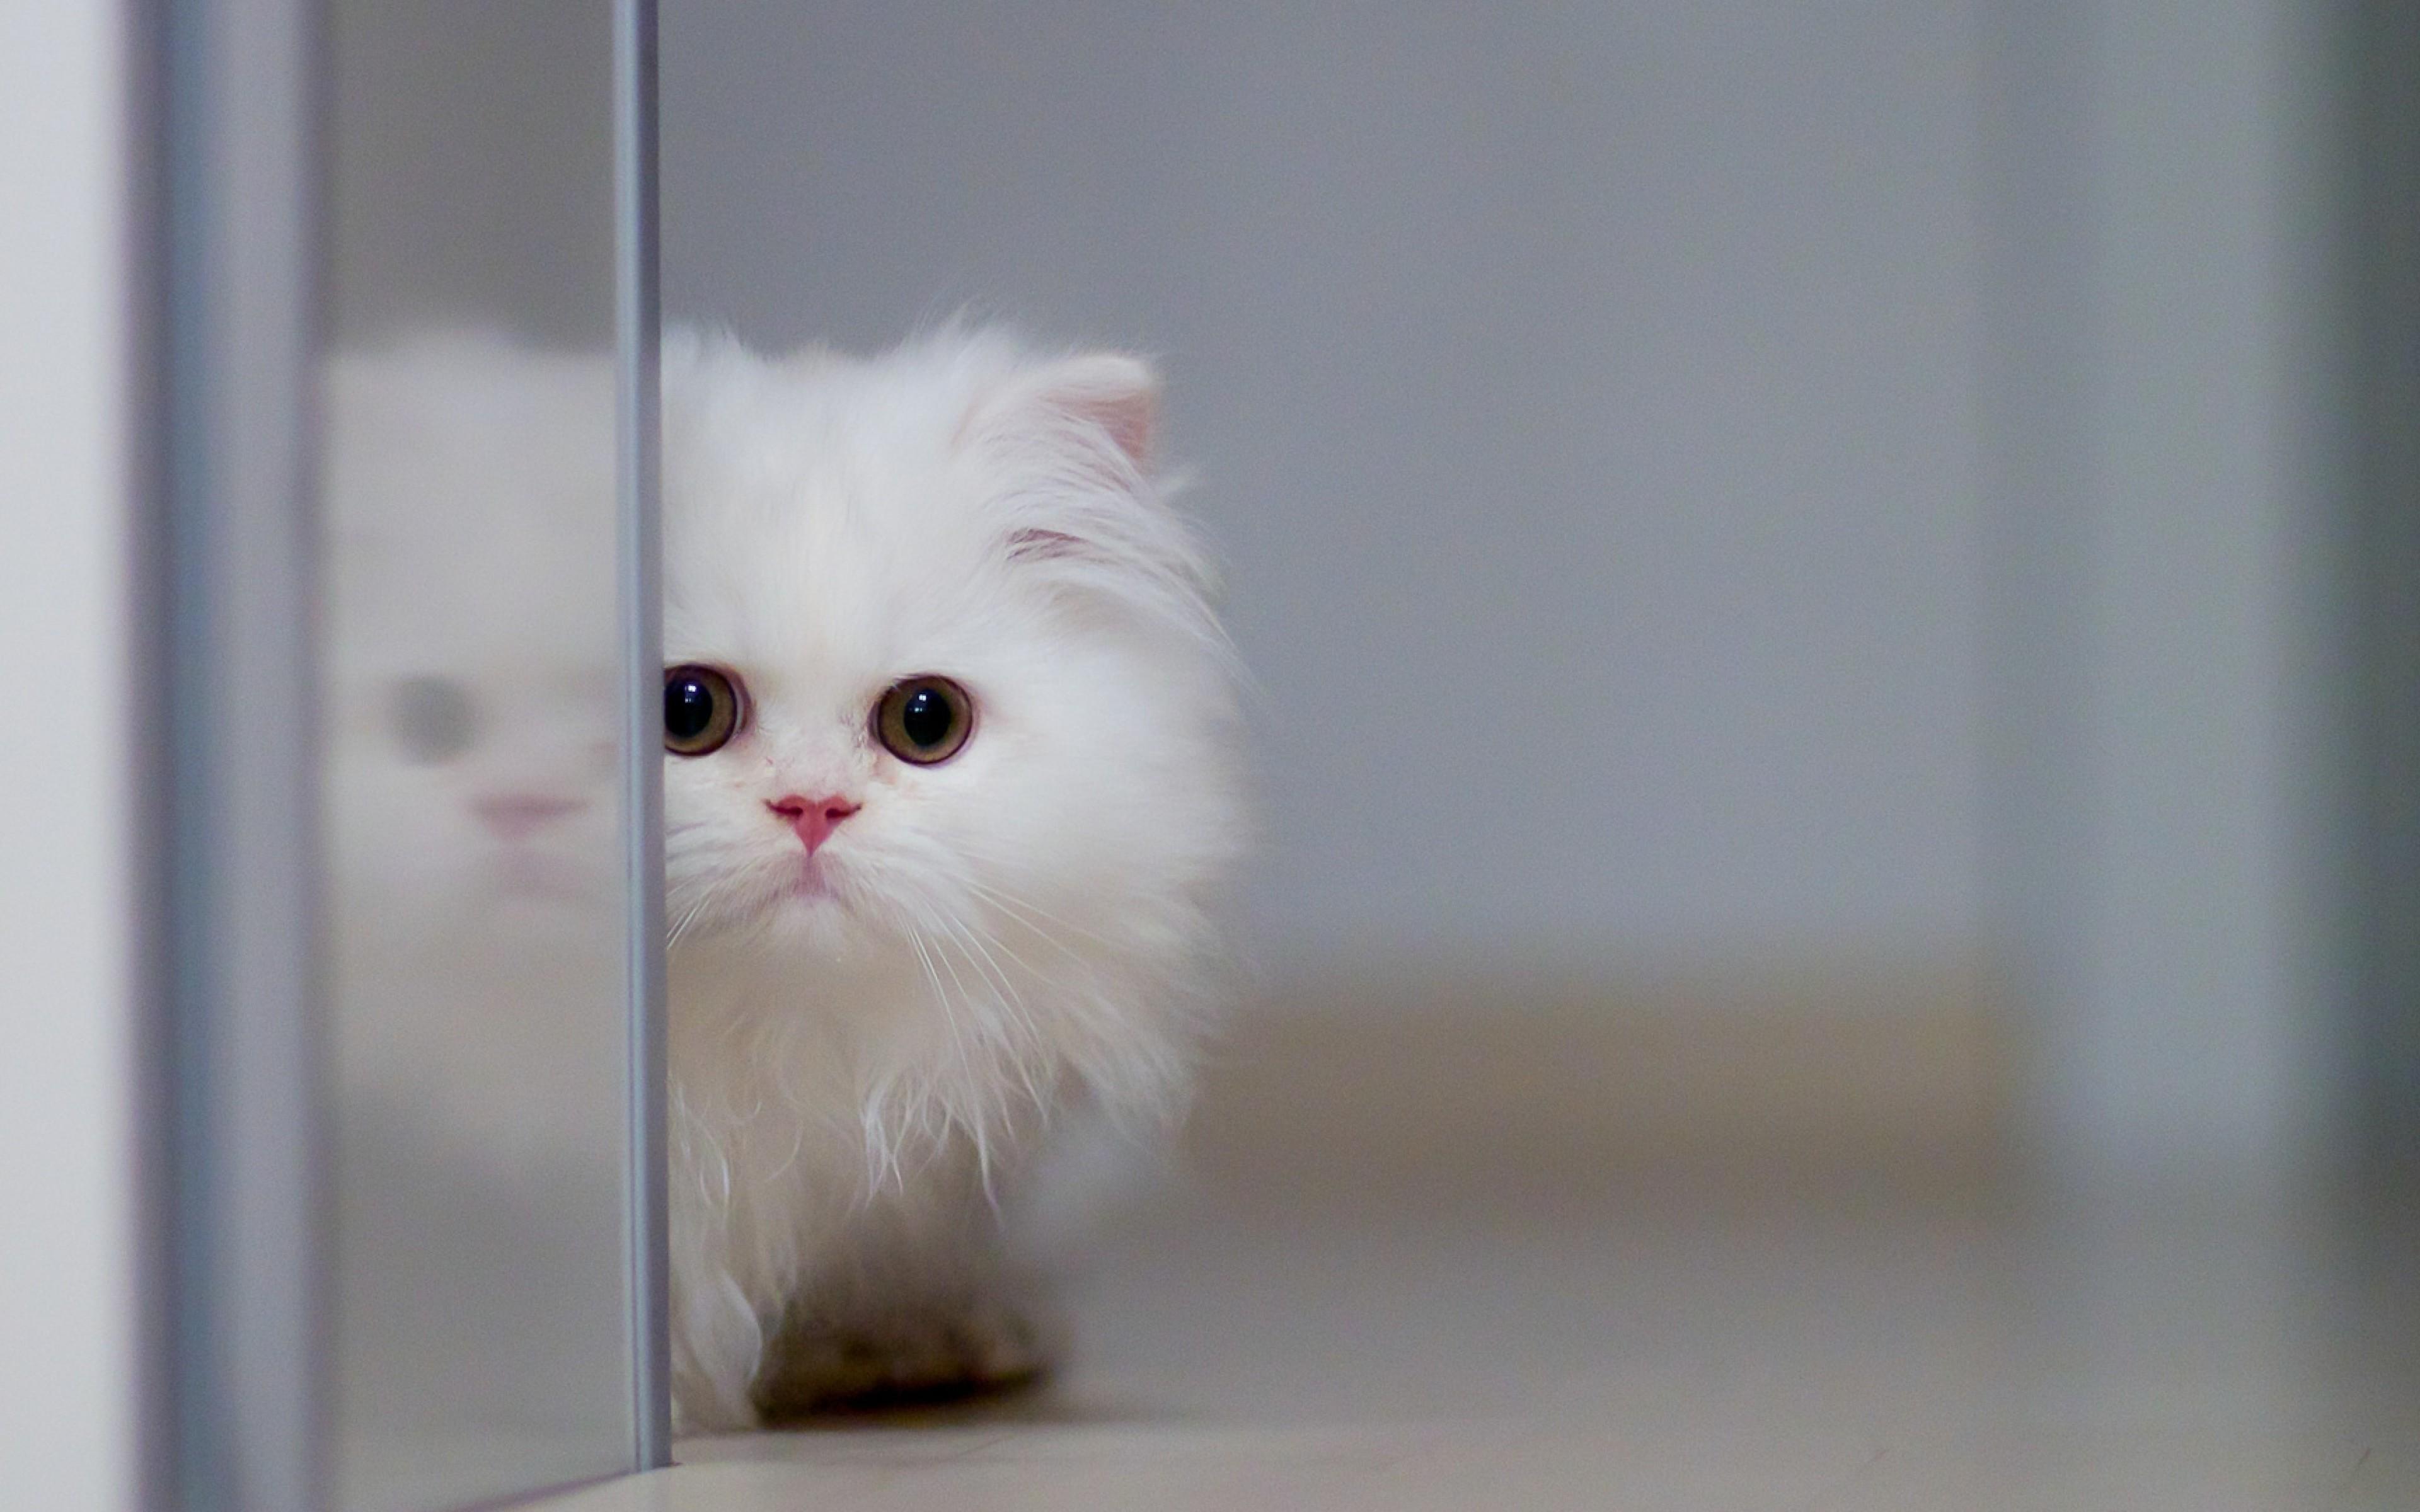 Fluffy white cat Wallpaper and Free